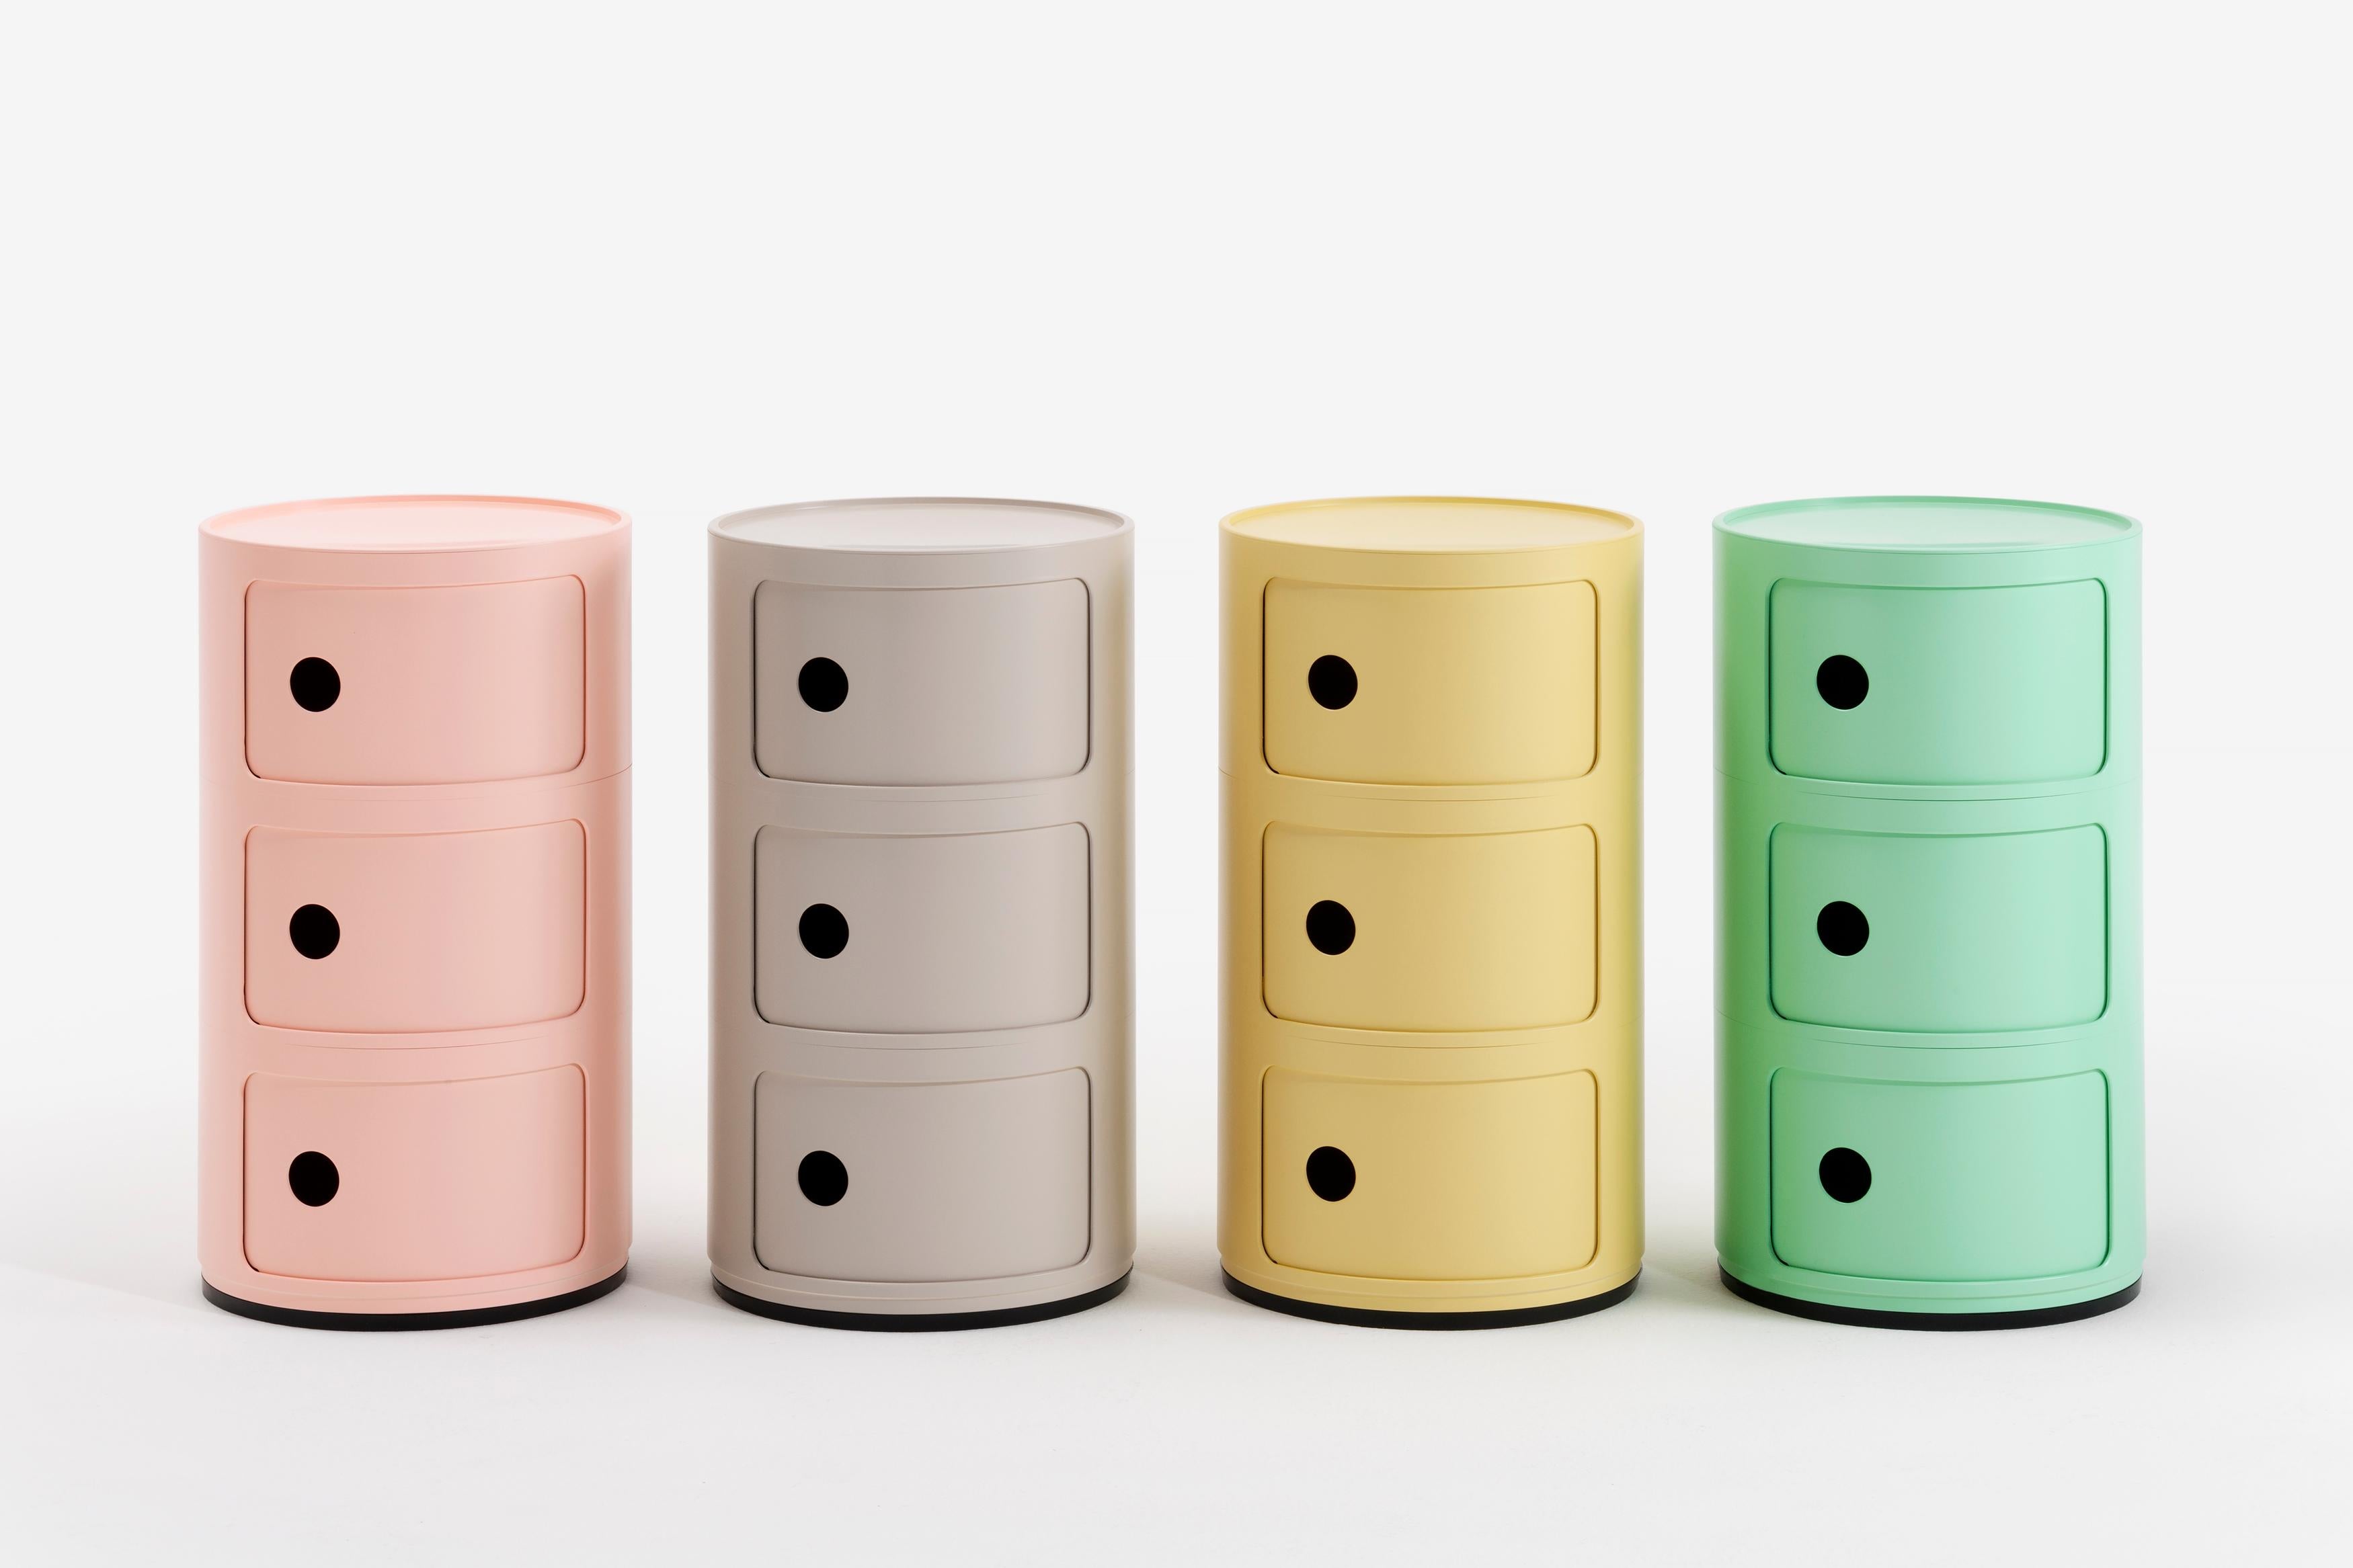 Componibili Bio in Green by Anna Castelli Ferrieri for Kartell. The Componibili Bio storage unit was first created by Italian designer and Kartell co-founder Anna Castelli Ferrieri in the 1960s. At the time of its origin, the Componibili Bio was